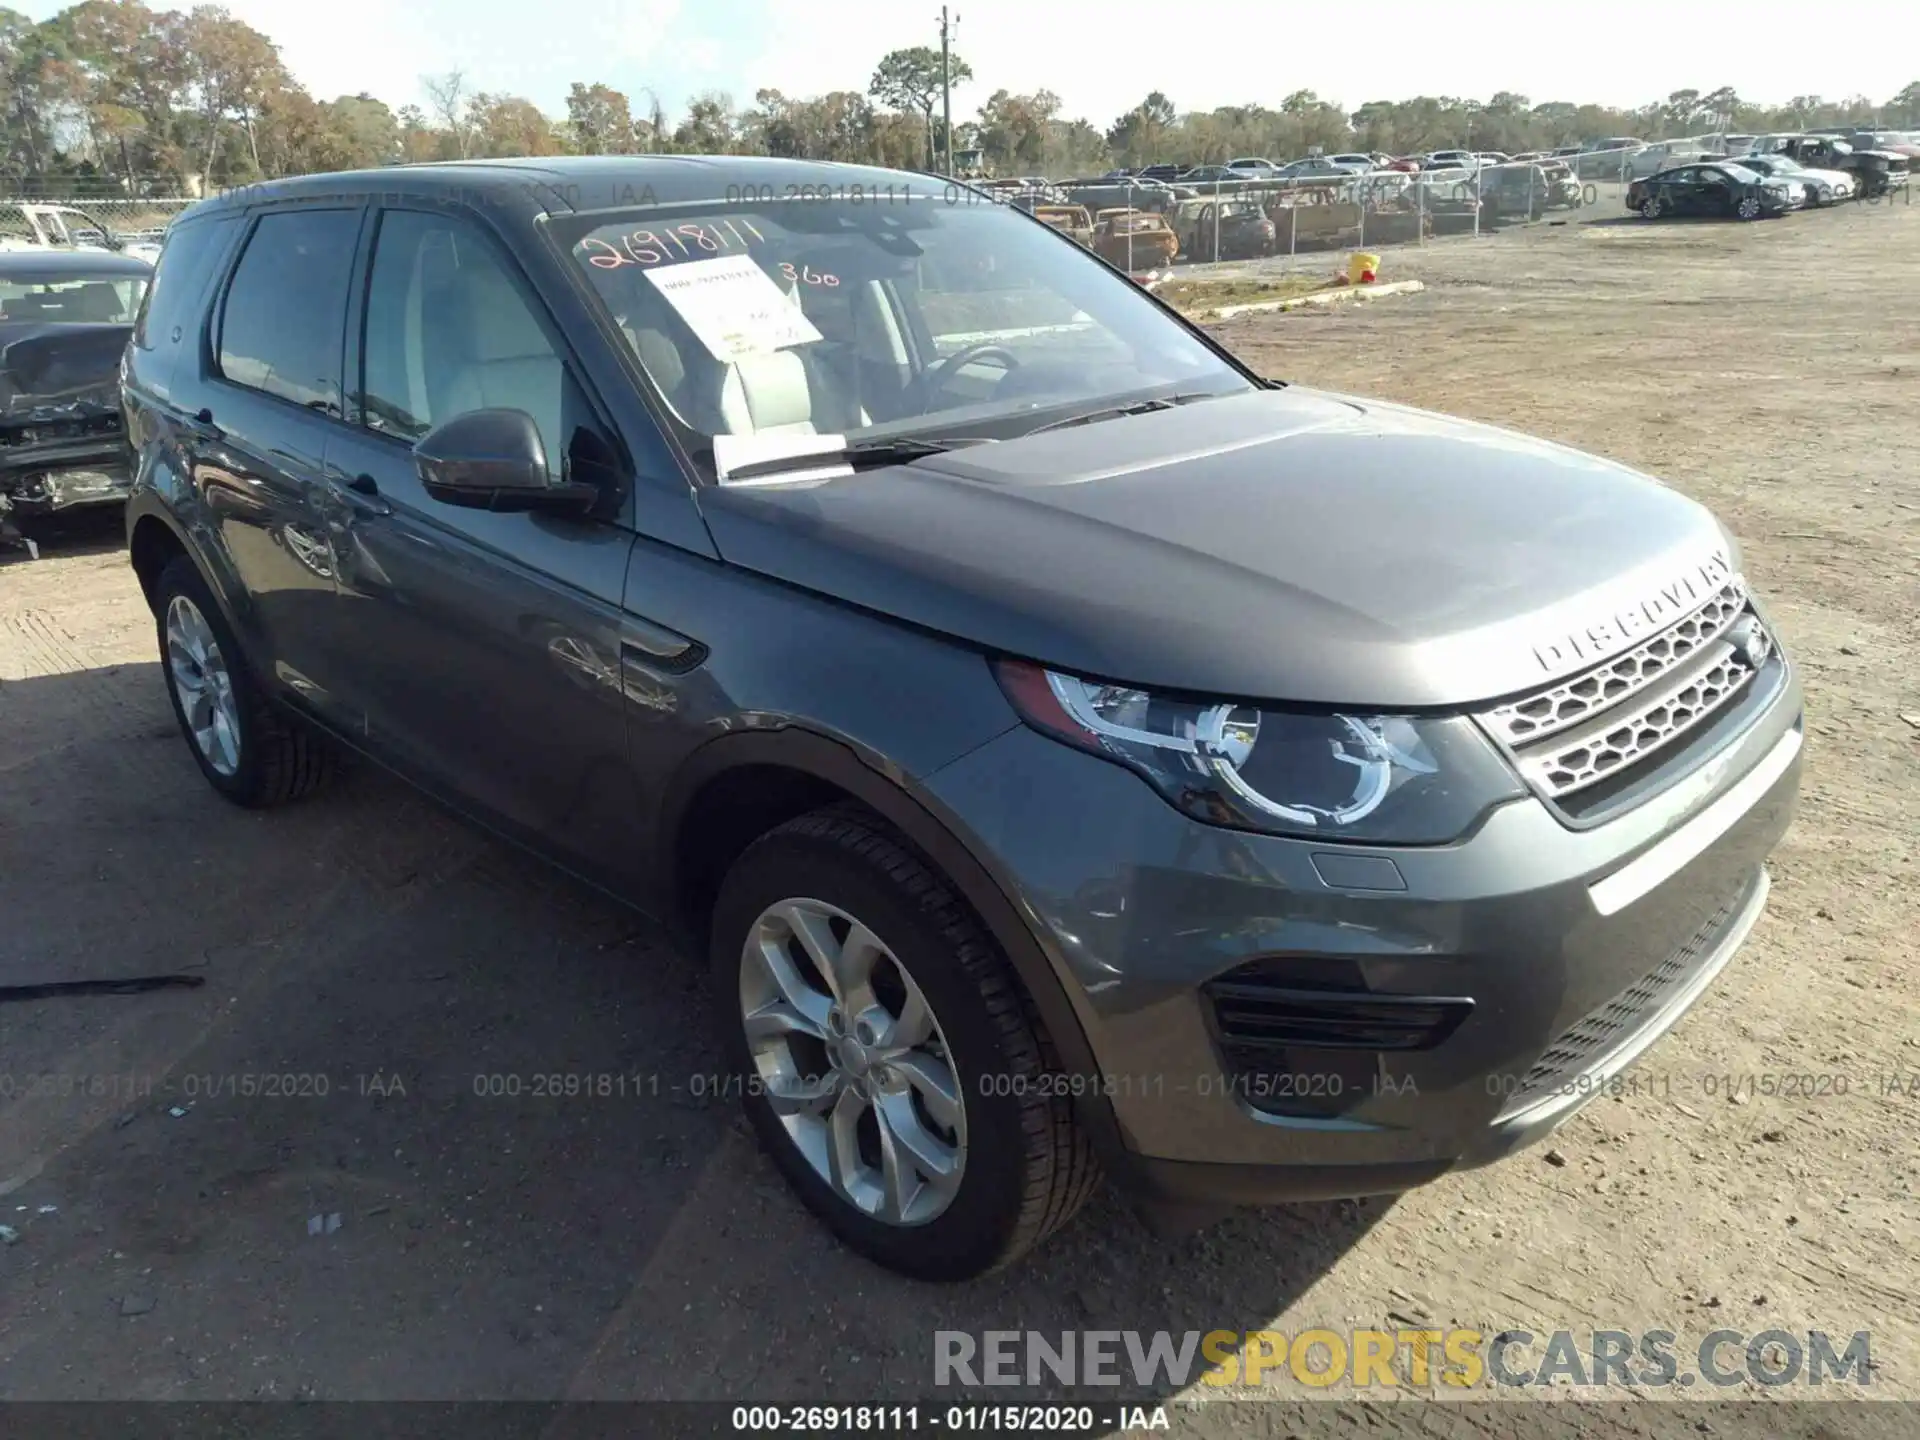 1 Photograph of a damaged car SALCP2FX3KH809644 LAND ROVER DISCOVERY SPORT 2019